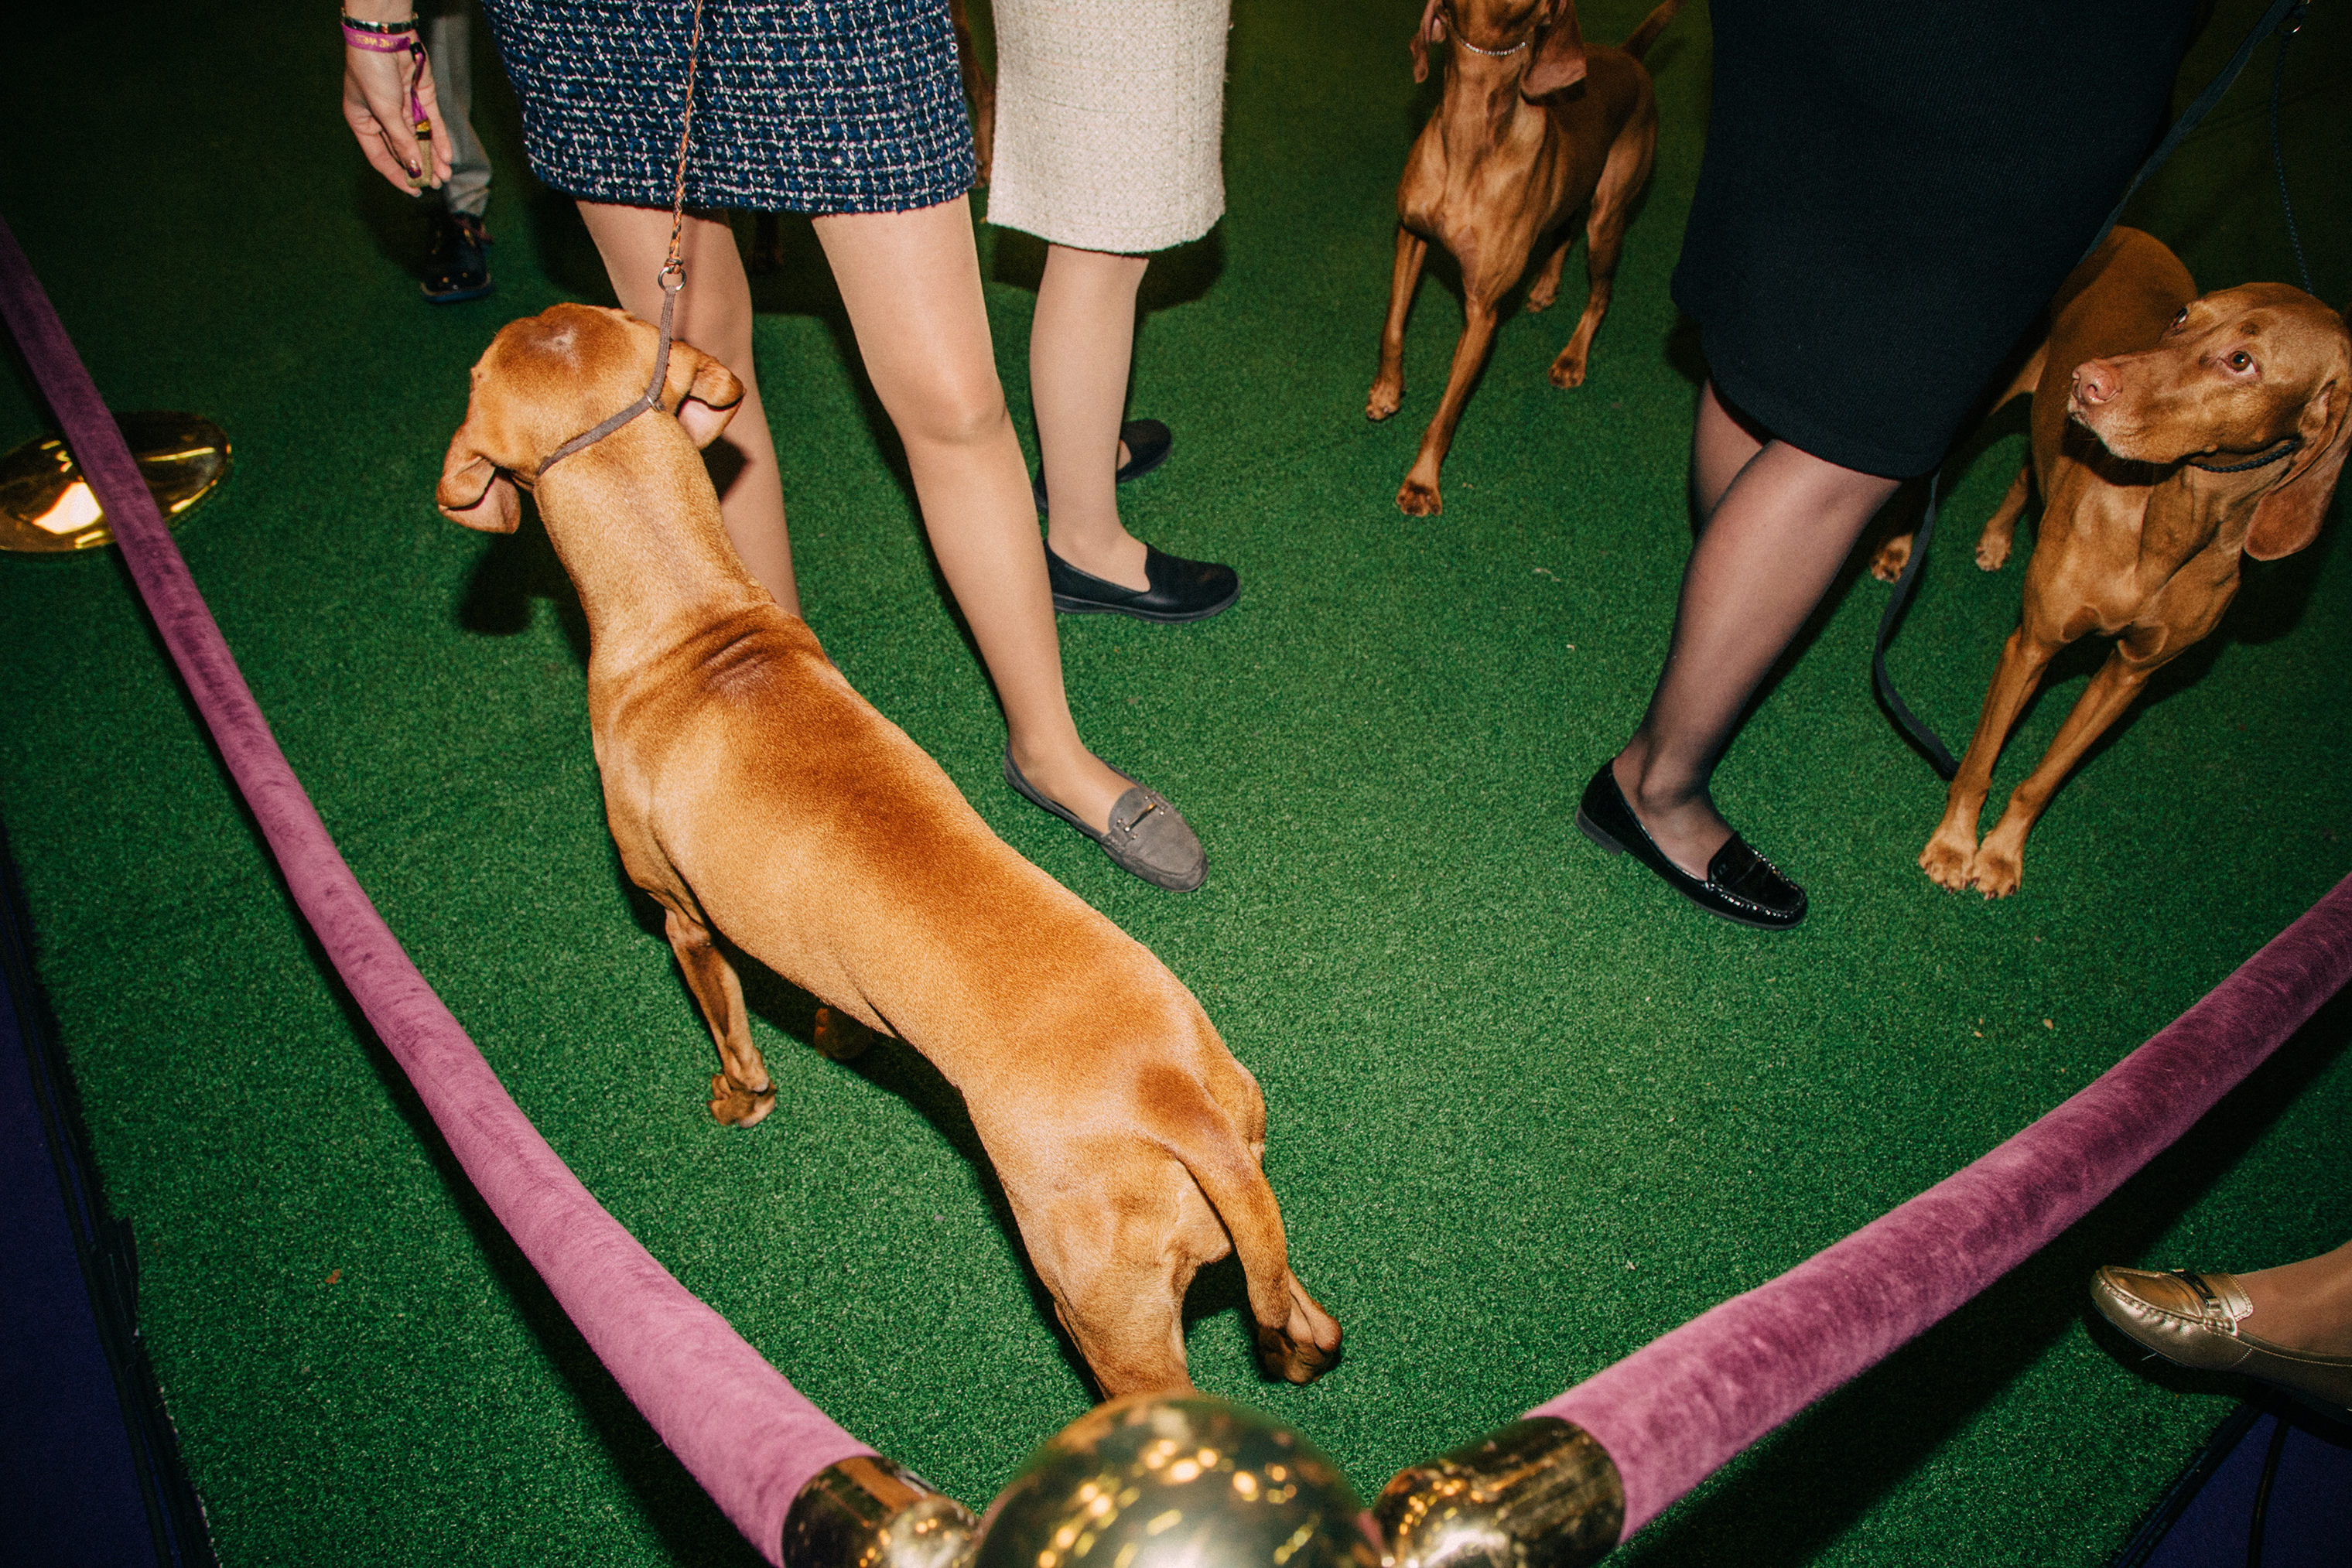 Dogs and their handlers at the Westminster Kennel Club Dog Show, held at Madison Square Garden in New York City, in February. (Clara Mokri for TIME)